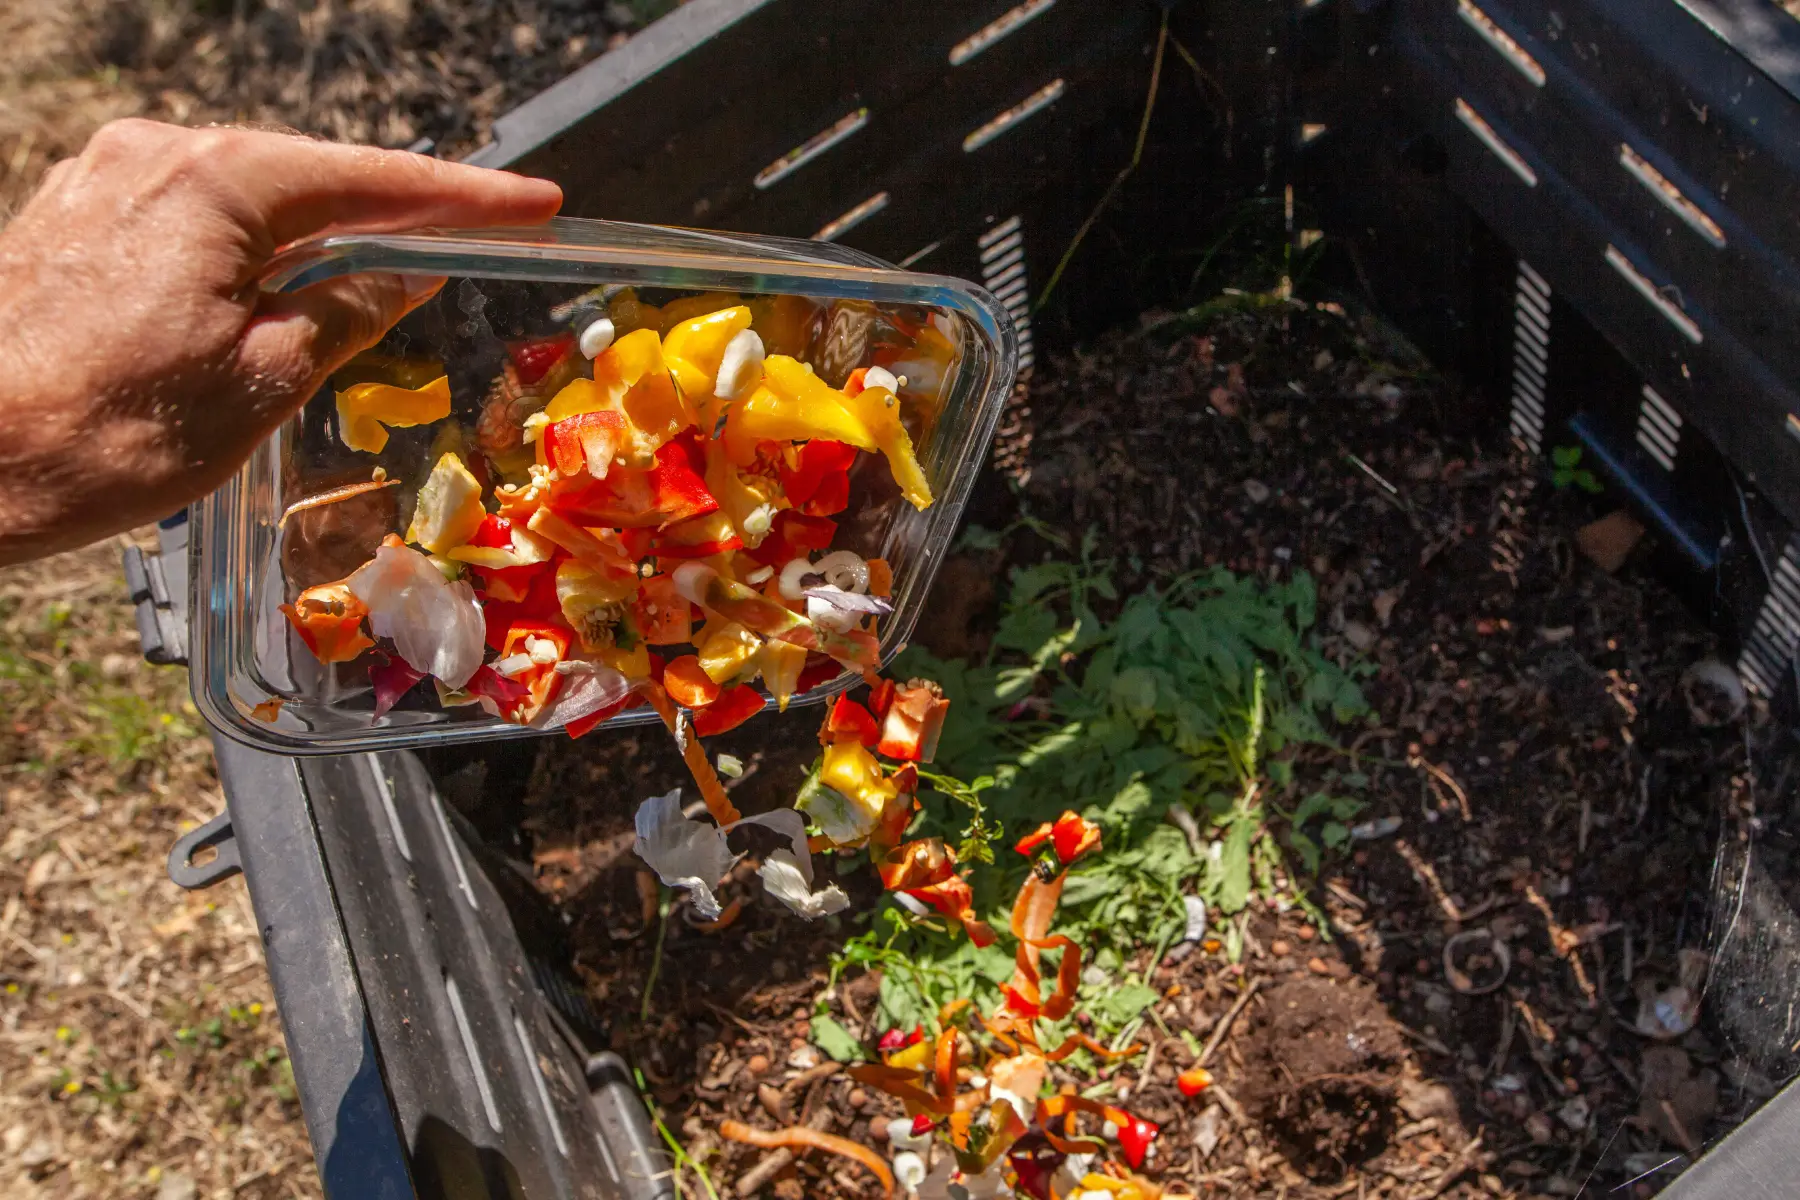 A hand pours vegetable waste from a glass container into a compost bin.